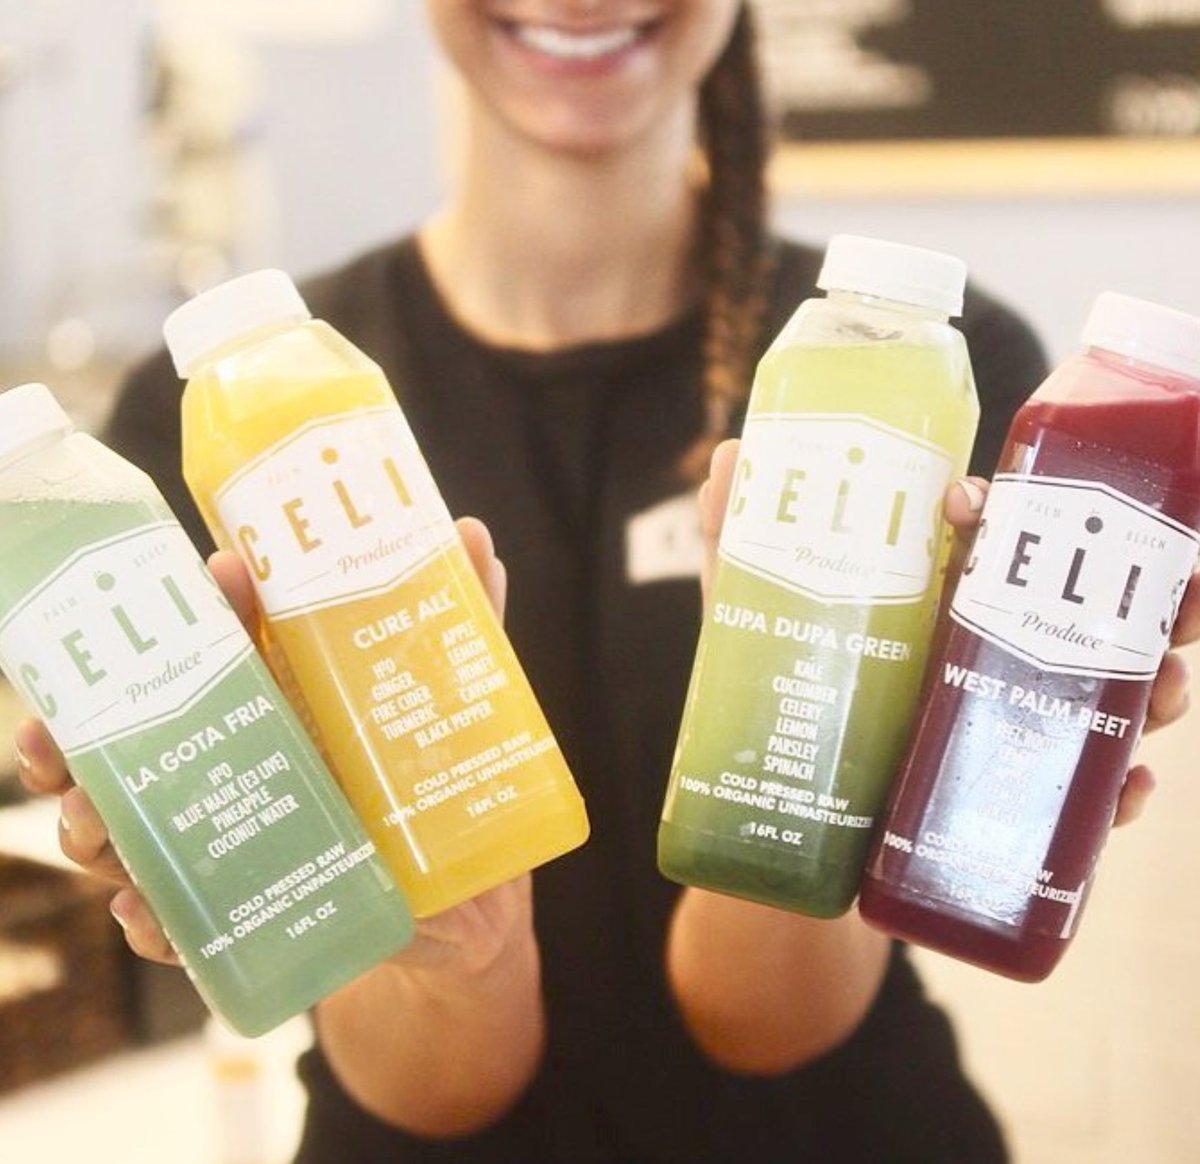 Start up your supa dupa day by drinking the rainbow with @CelisProduce. We promise, it's never tasted so good. #westpalmbeet